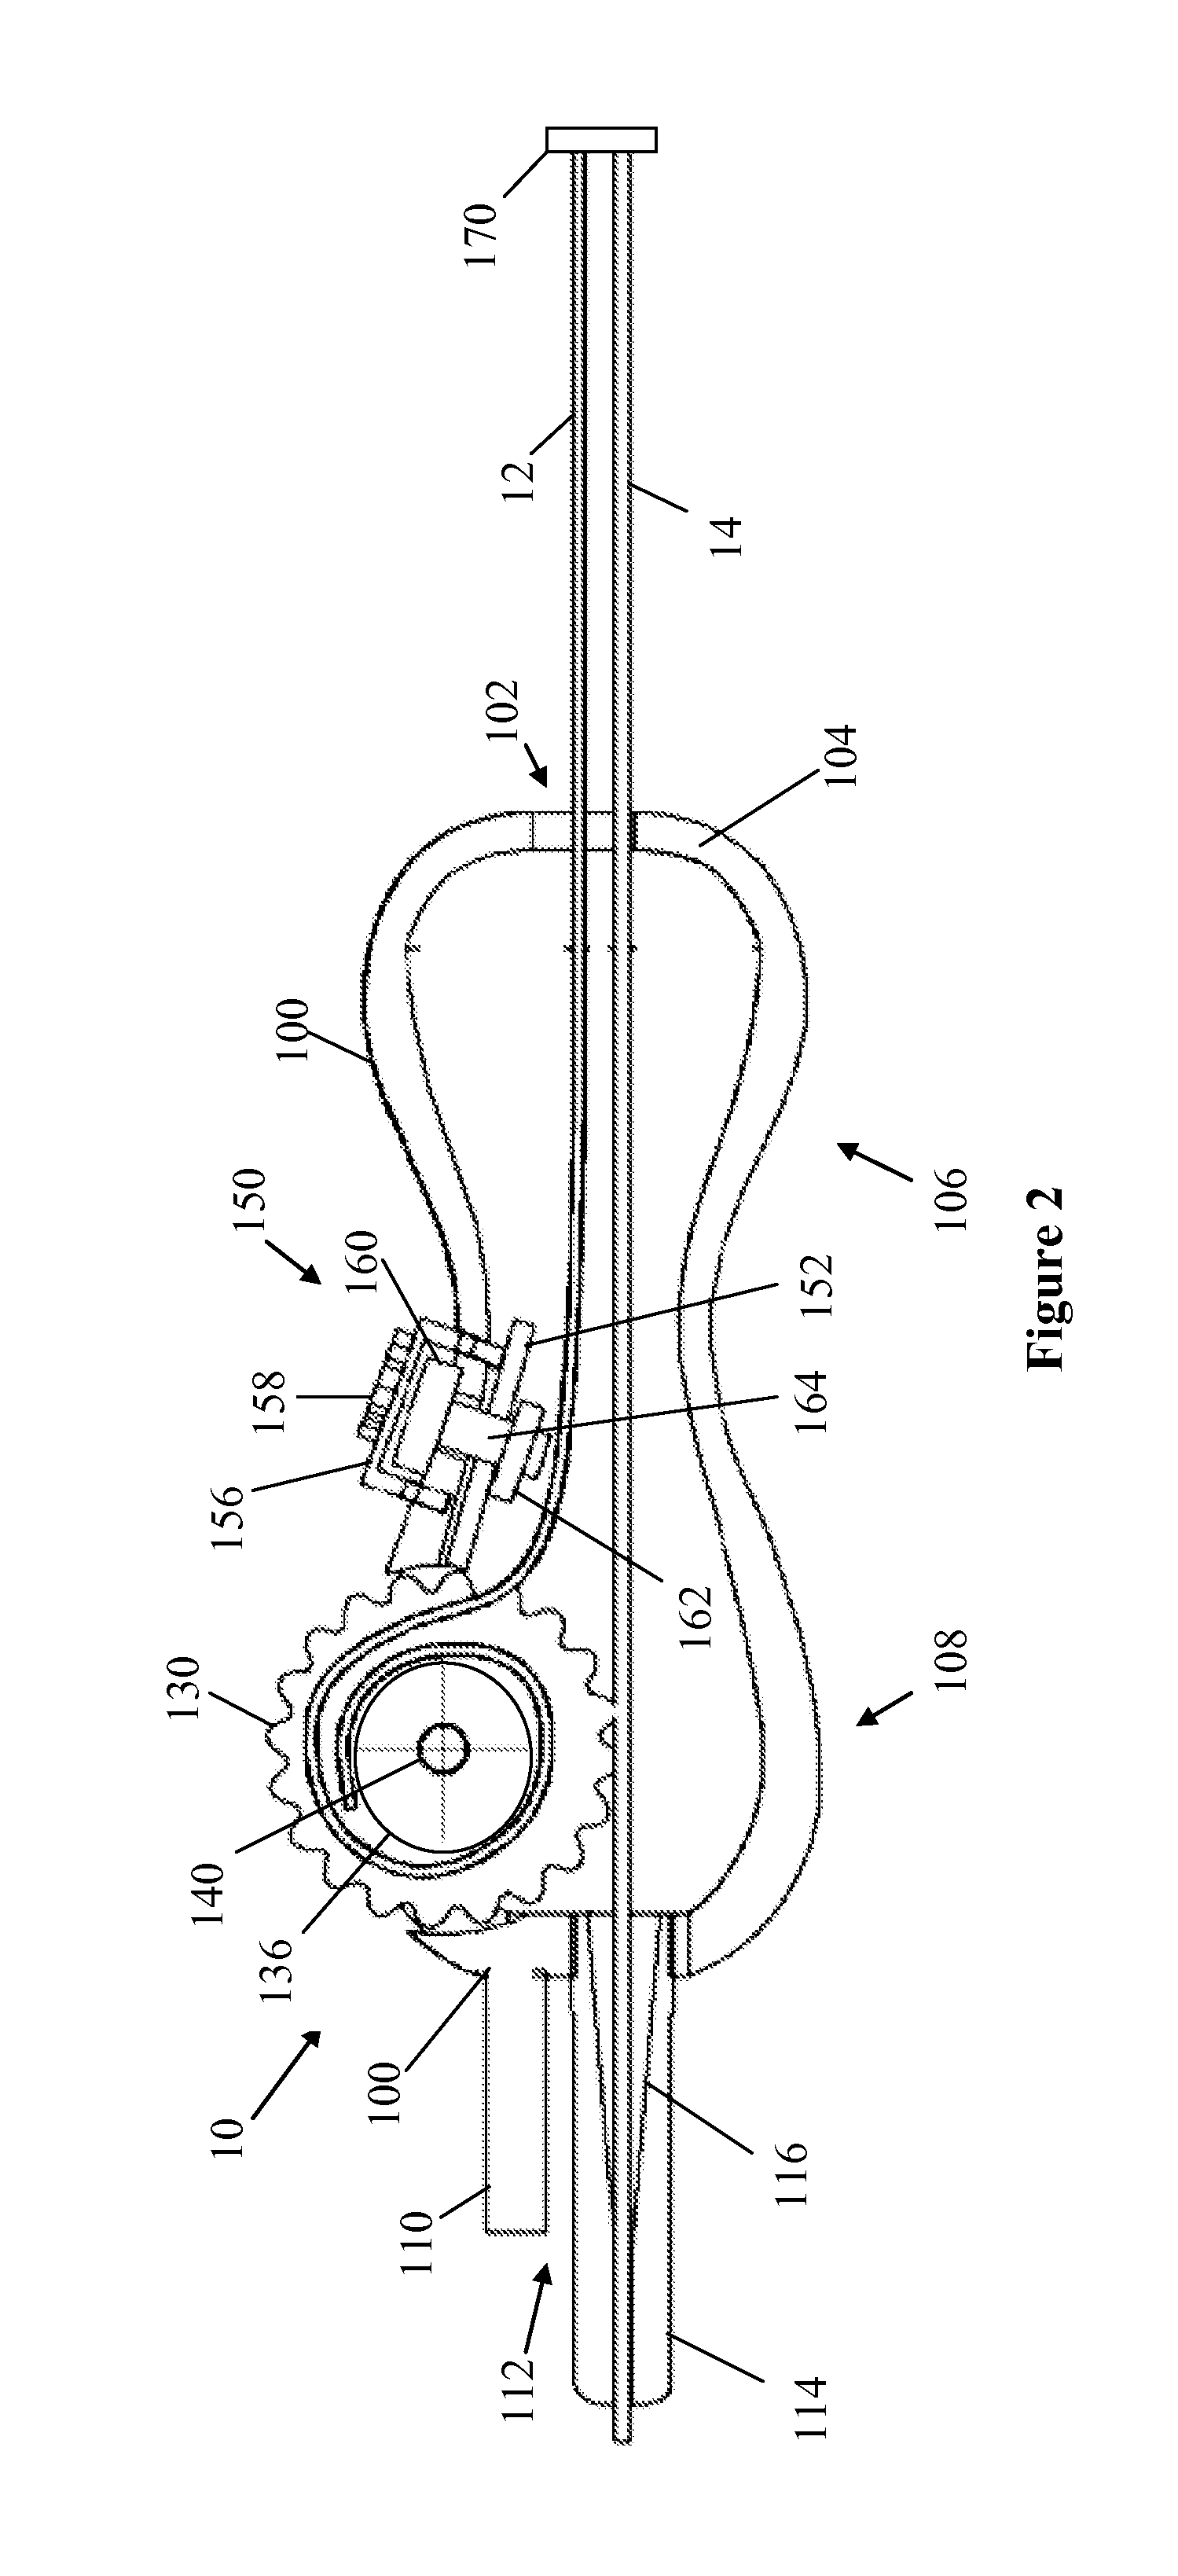 Catheter placement device